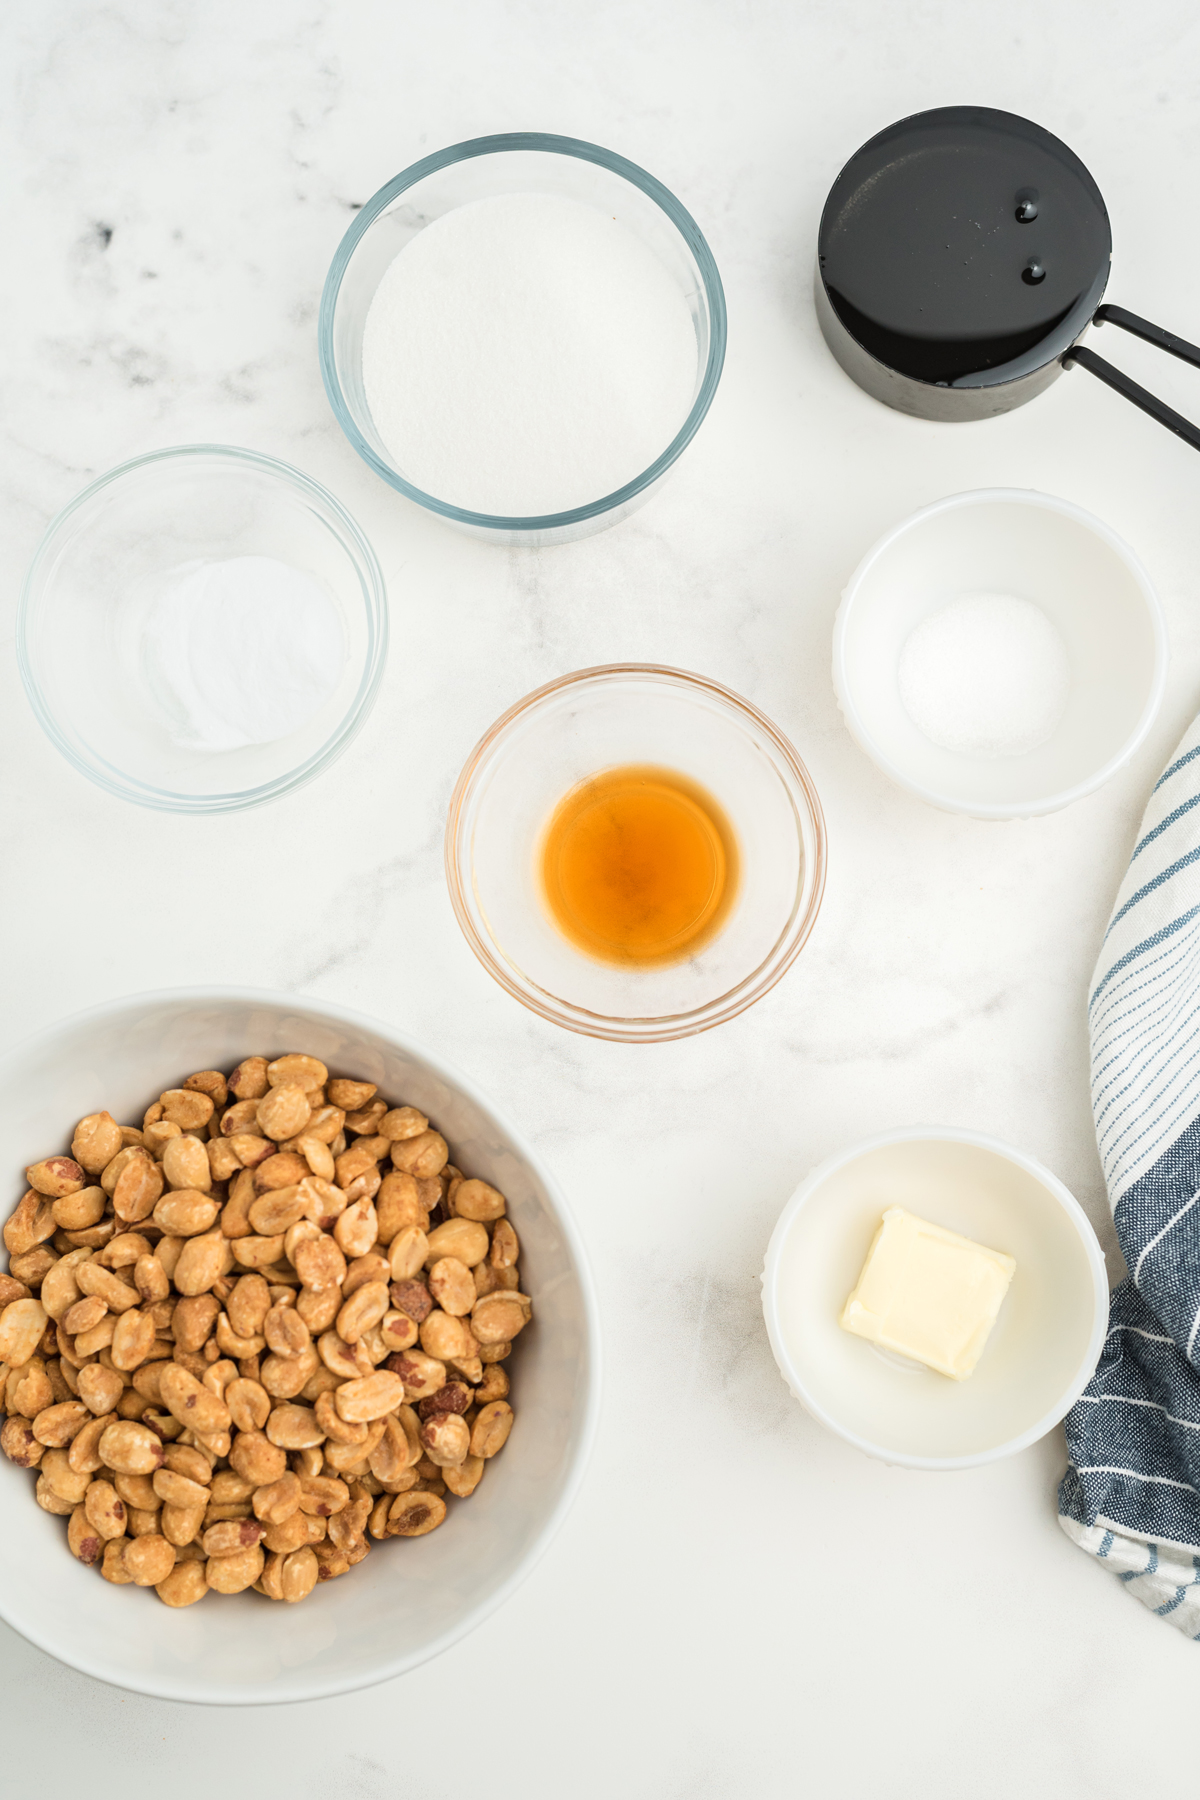 Flatlay of peanut brittle ingredients which includes peanuts, butter, vanilla, sugar, and corn syrup.